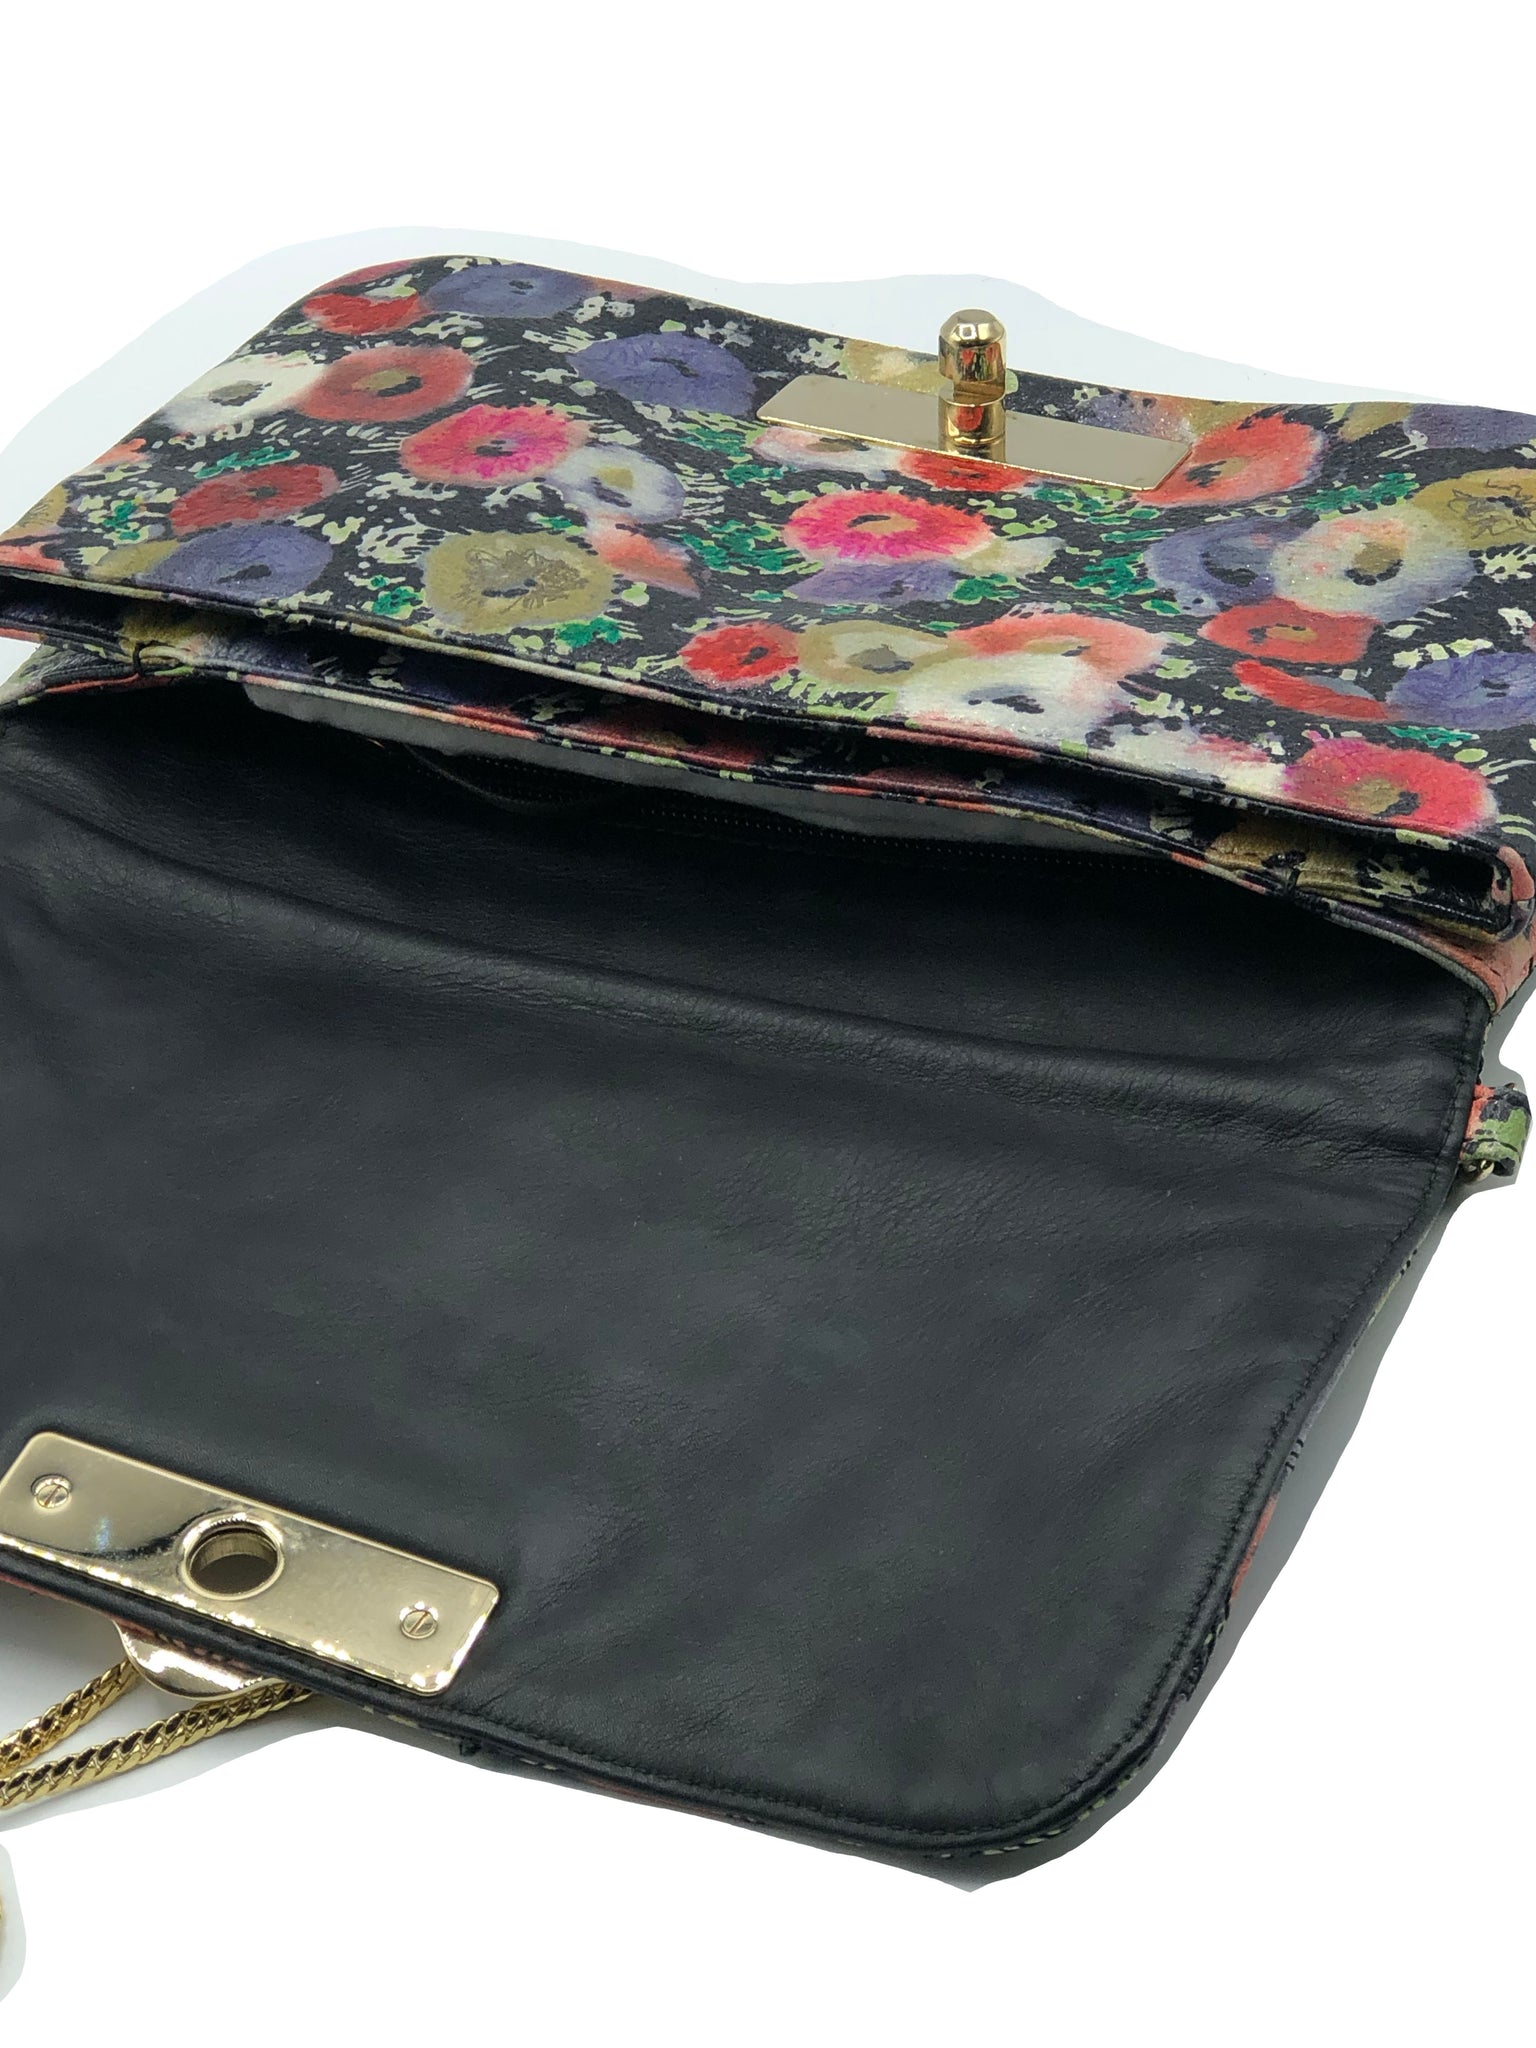 Bally Leather Quilted Floral Shoulder Bag OPEN 3 of 5